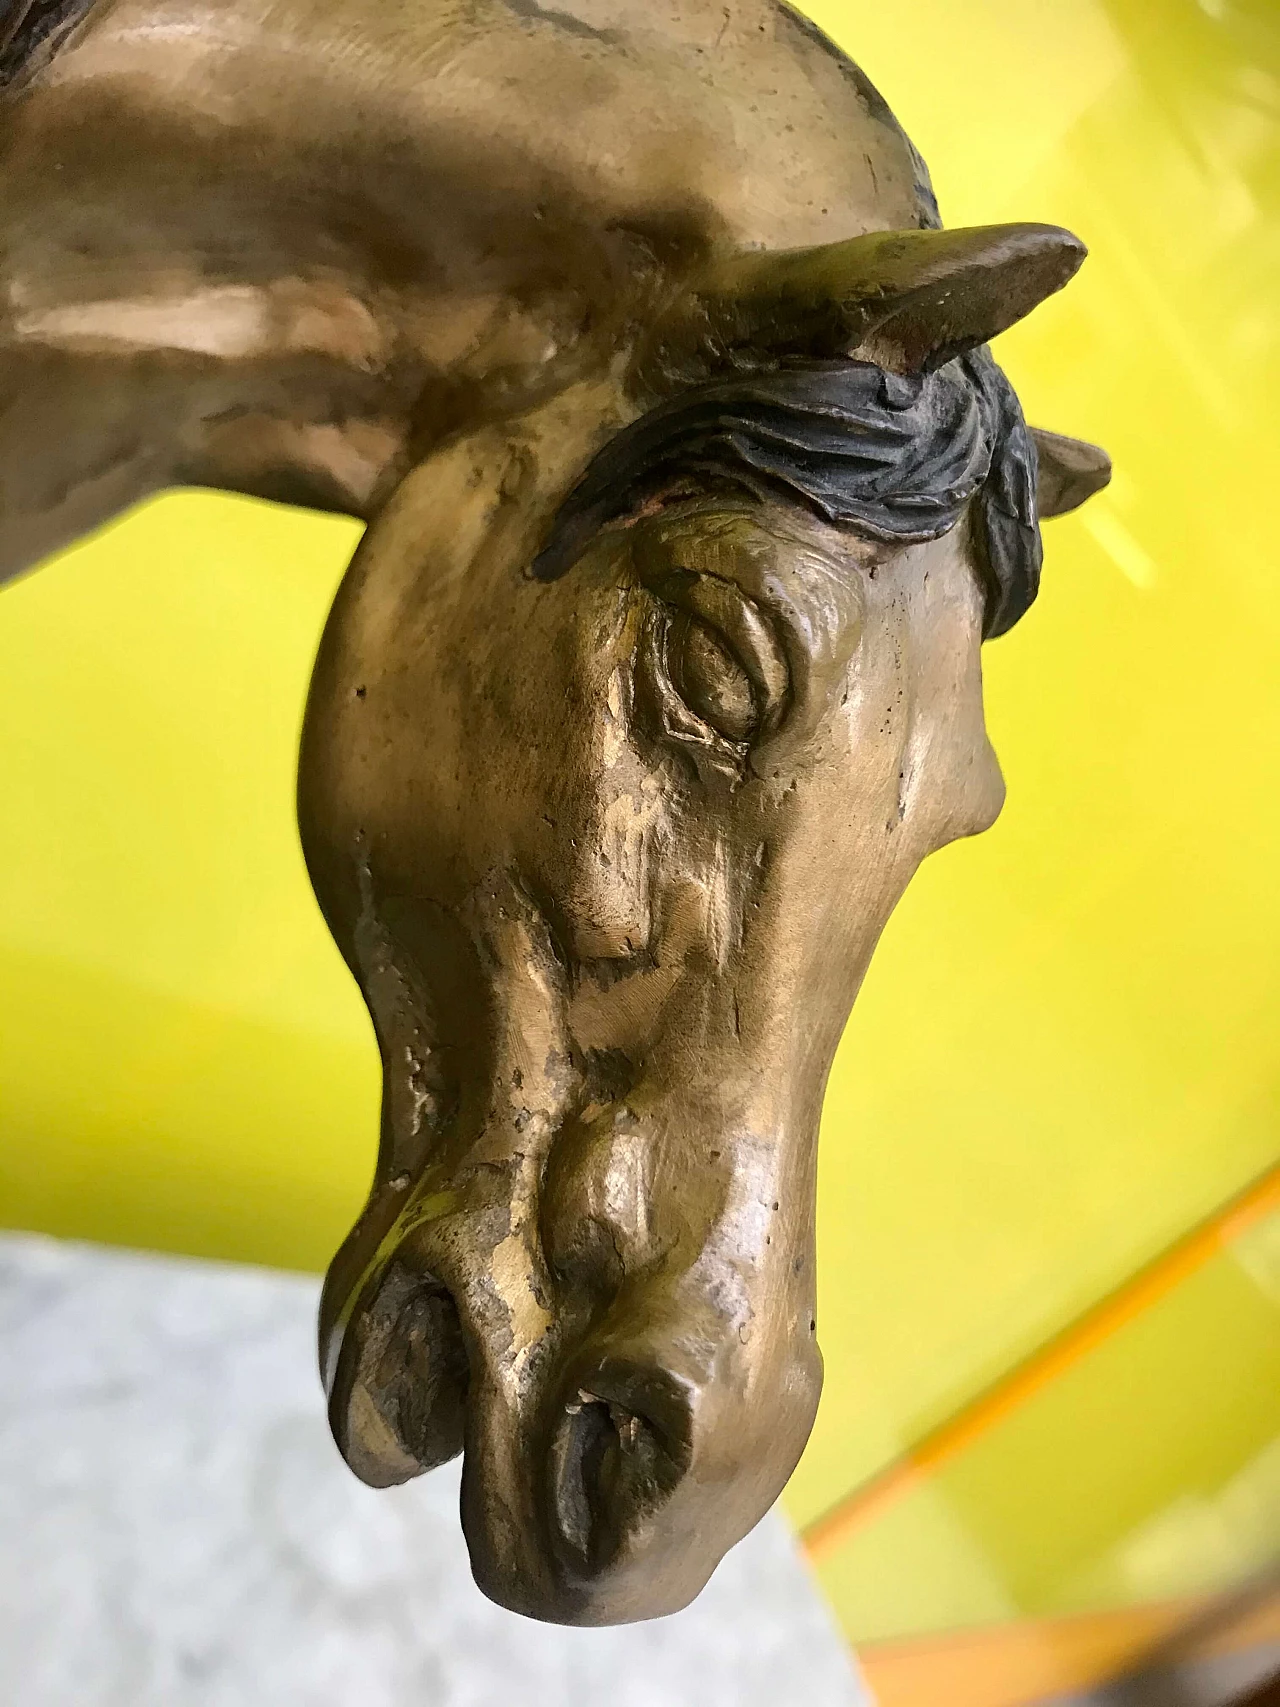 P.J.Mêne, gilded and burnished bronze sculpture of a "Horse" with black marble base, original 19th century 1177736